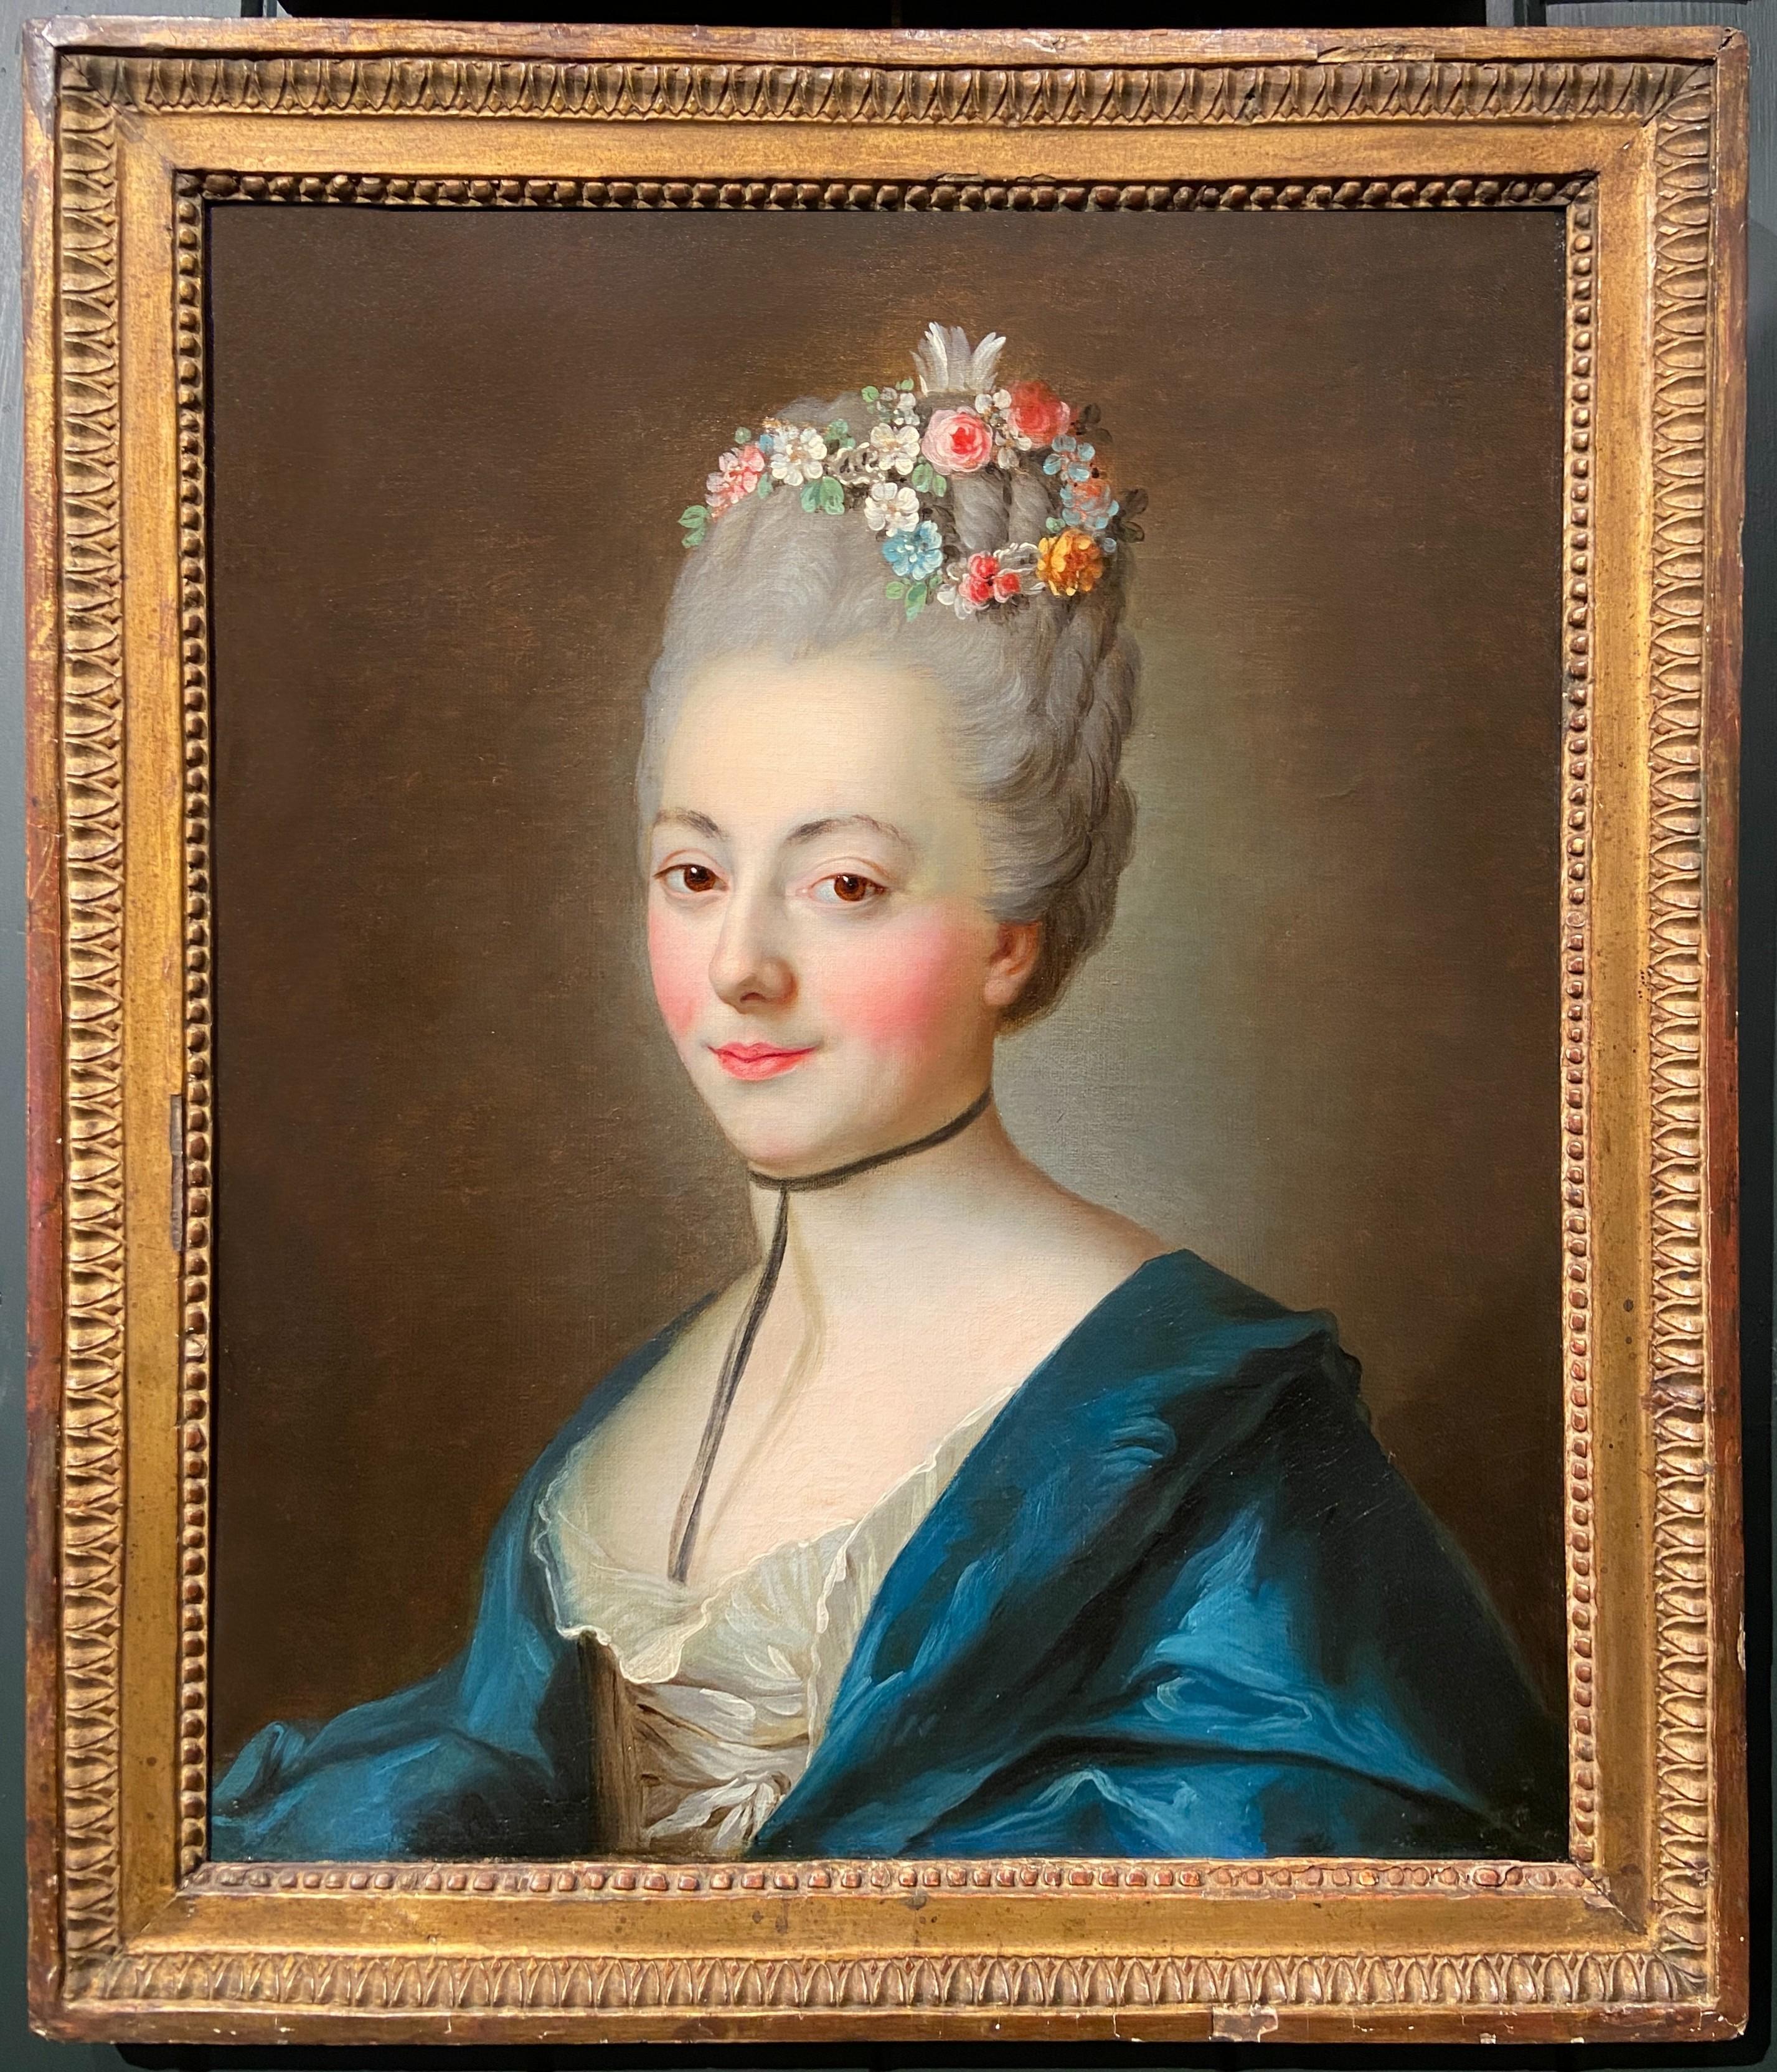 Portrait of a Lady with her Hair Adorned with Flowers, 18th Century French - Painting by Alexander Roslin